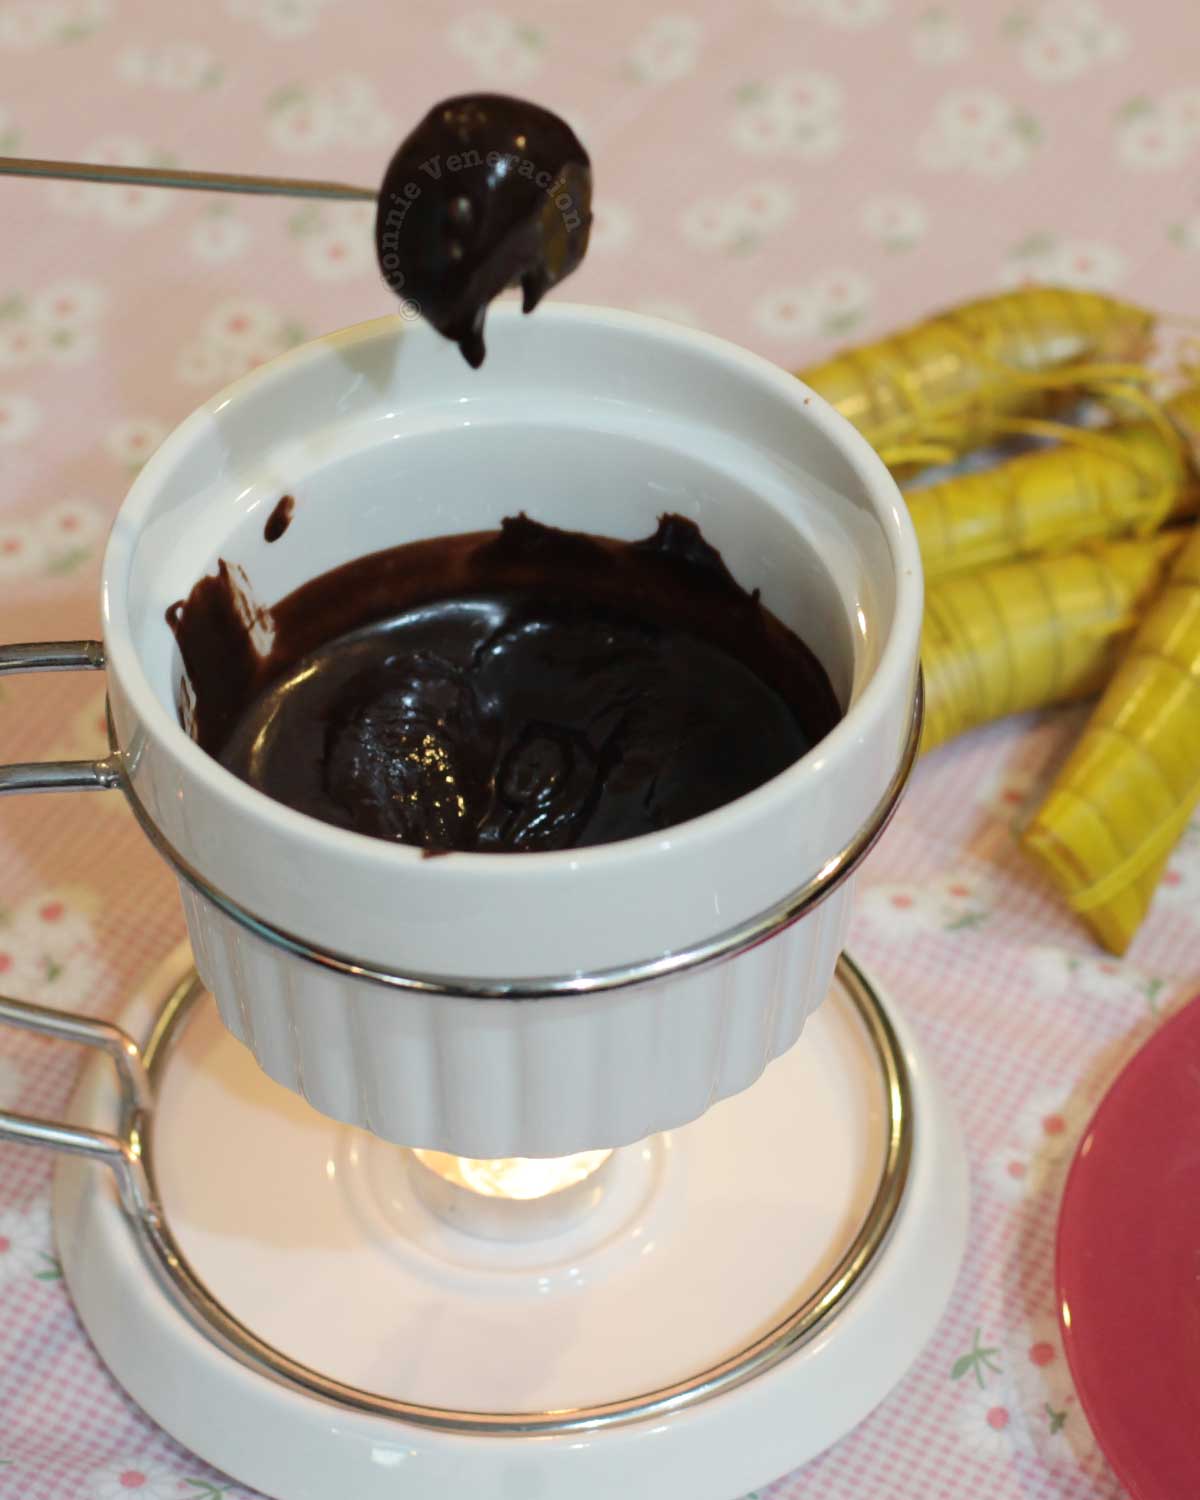 Dipping suman (Filipino sticky rice cakes) in chocolate